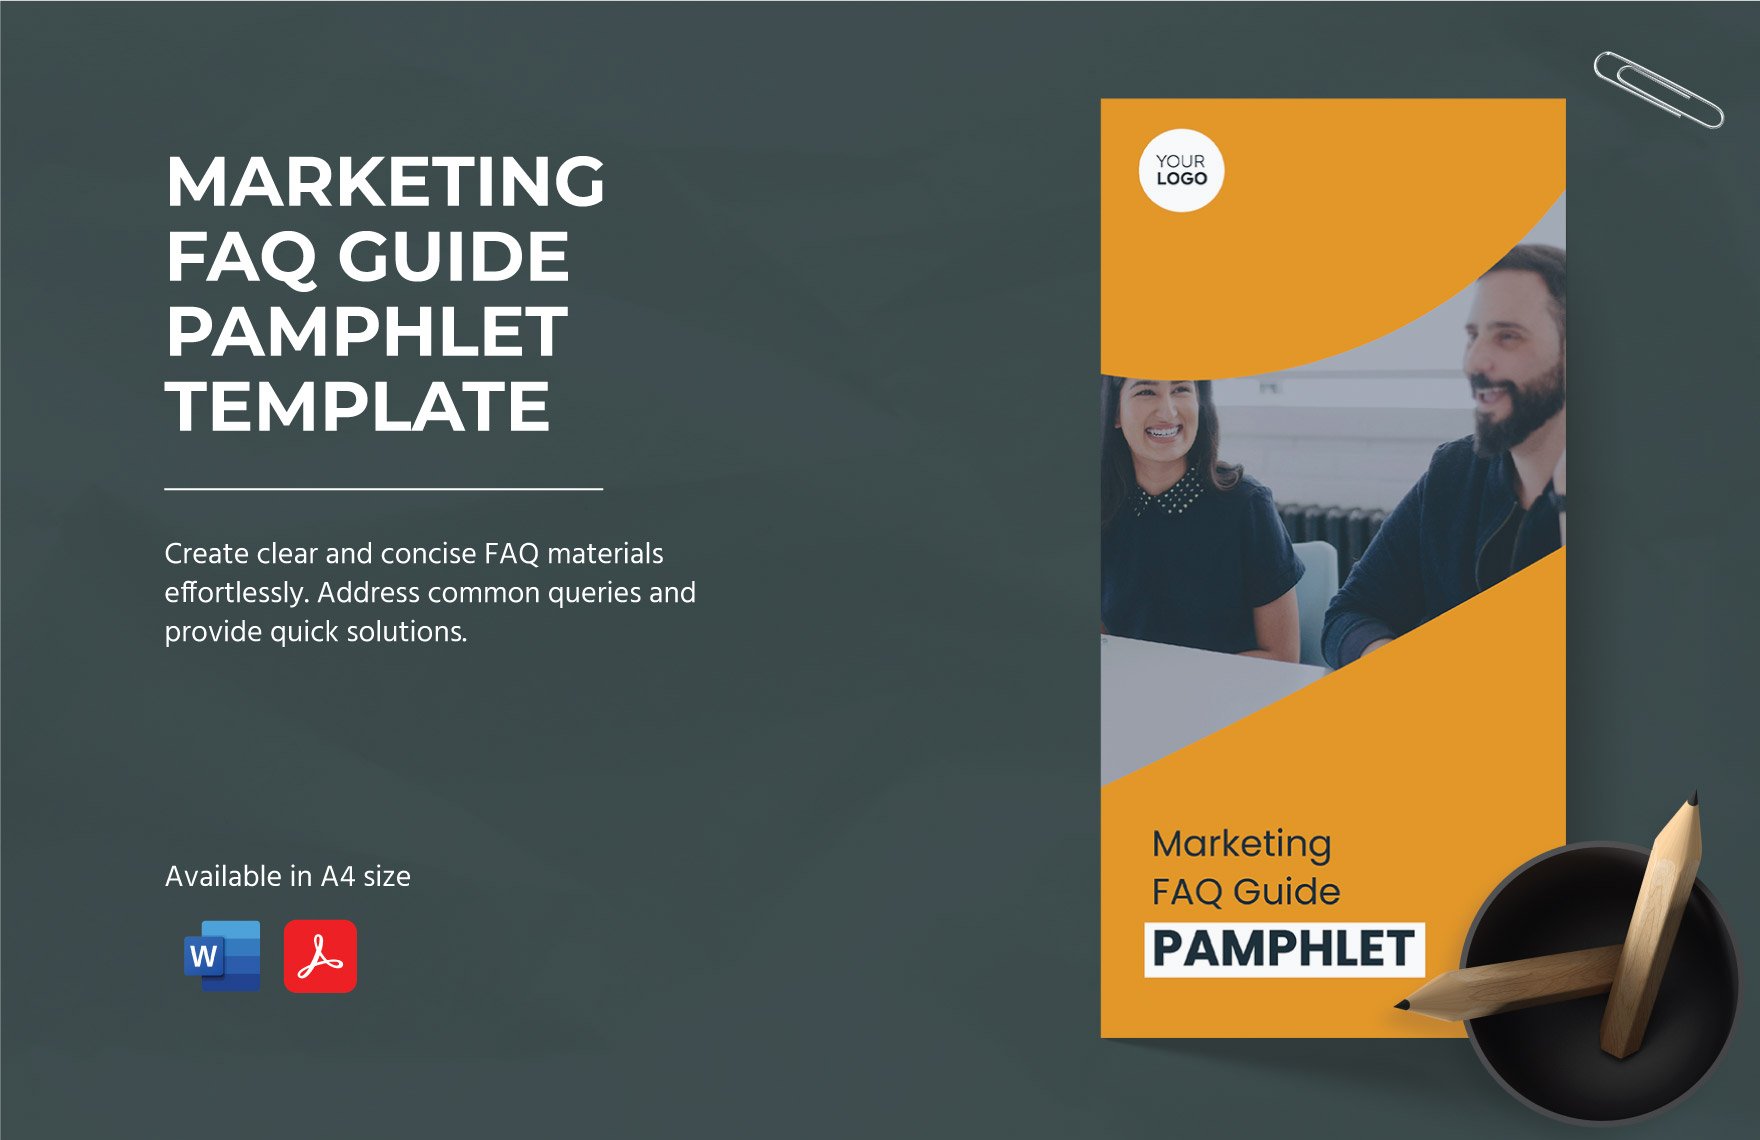 Marketing FAQ Guide Pamphlet Template